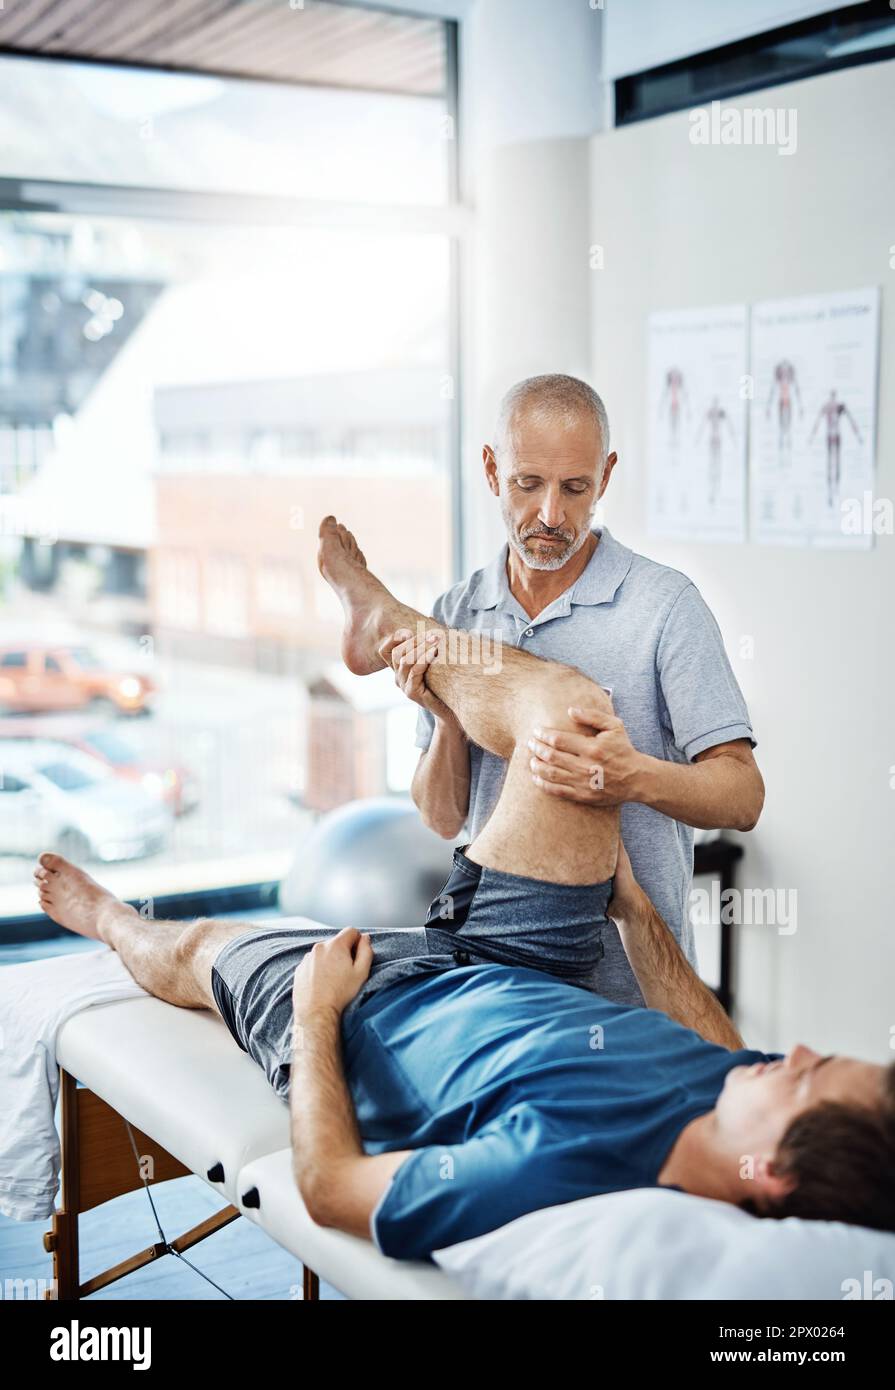 With careful exercises, your pain will soon be relieved. a physiotherapist treating a patient Stock Photo